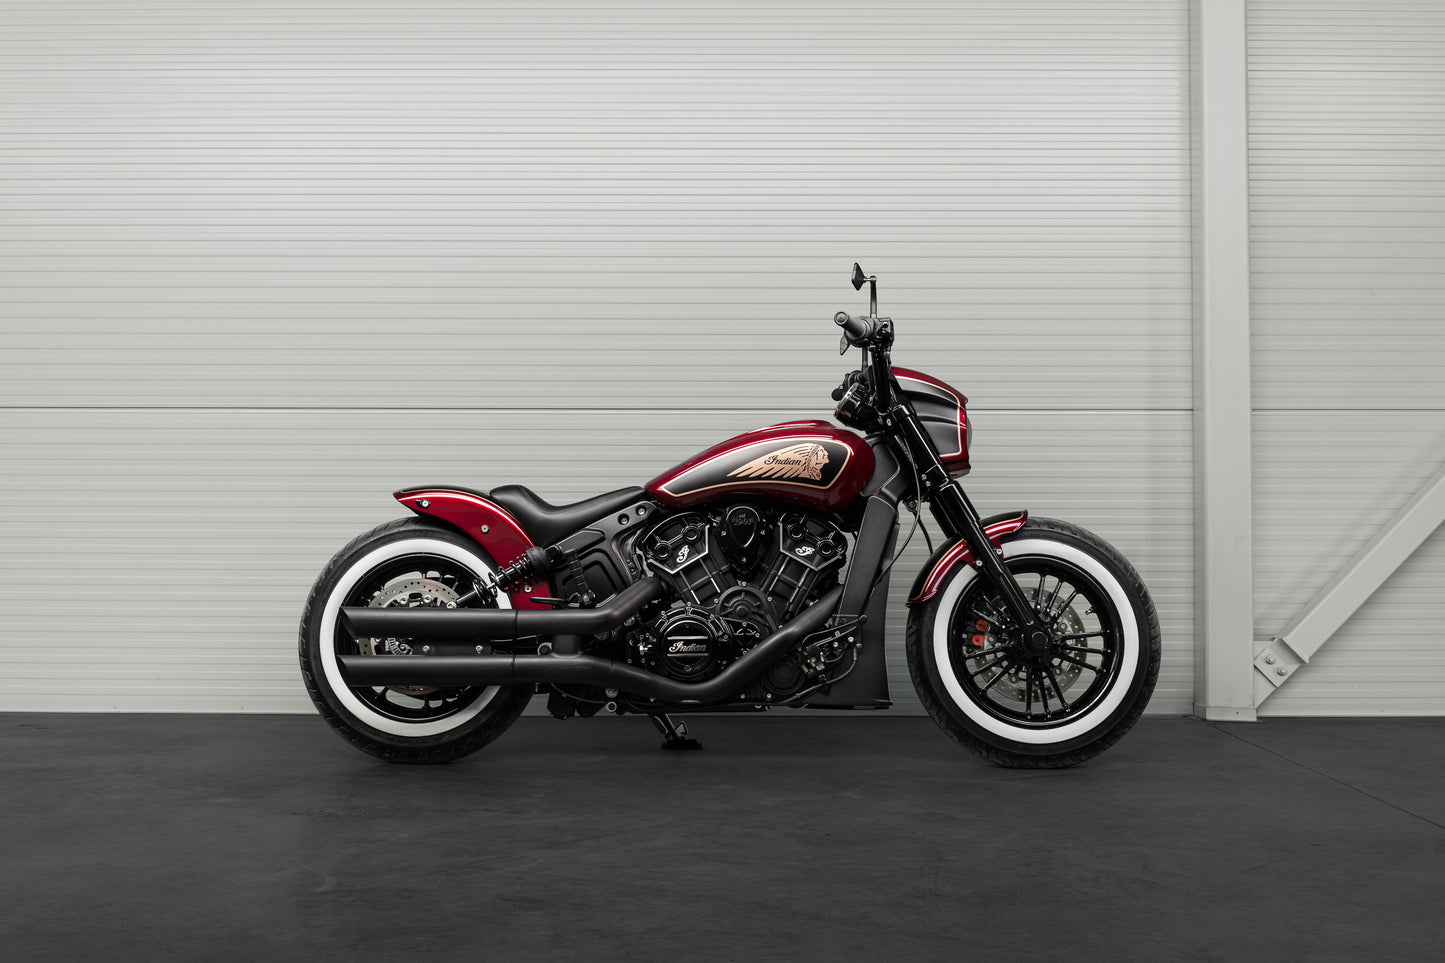 Harley Davidson motorcycle with Killer Custom Indian scout solo seat from the side in a modern garage